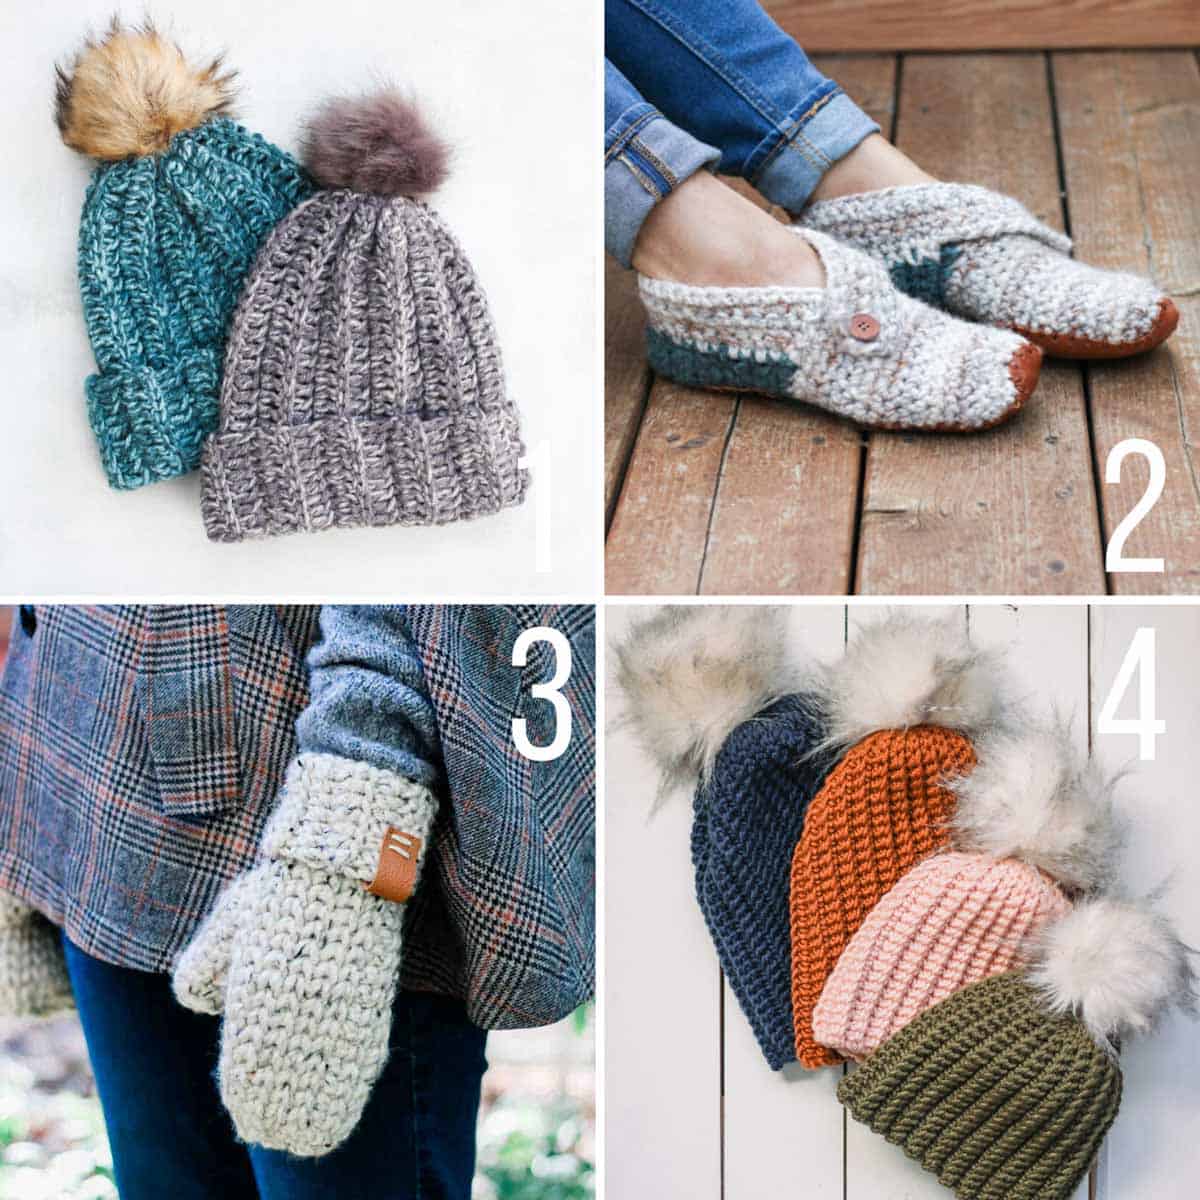 Grid of four free crochet patterns - an easy, chunky beanie, a pair of women's slippers, a pair of mittens made in three hours, and the easiest crochet beanie ever.